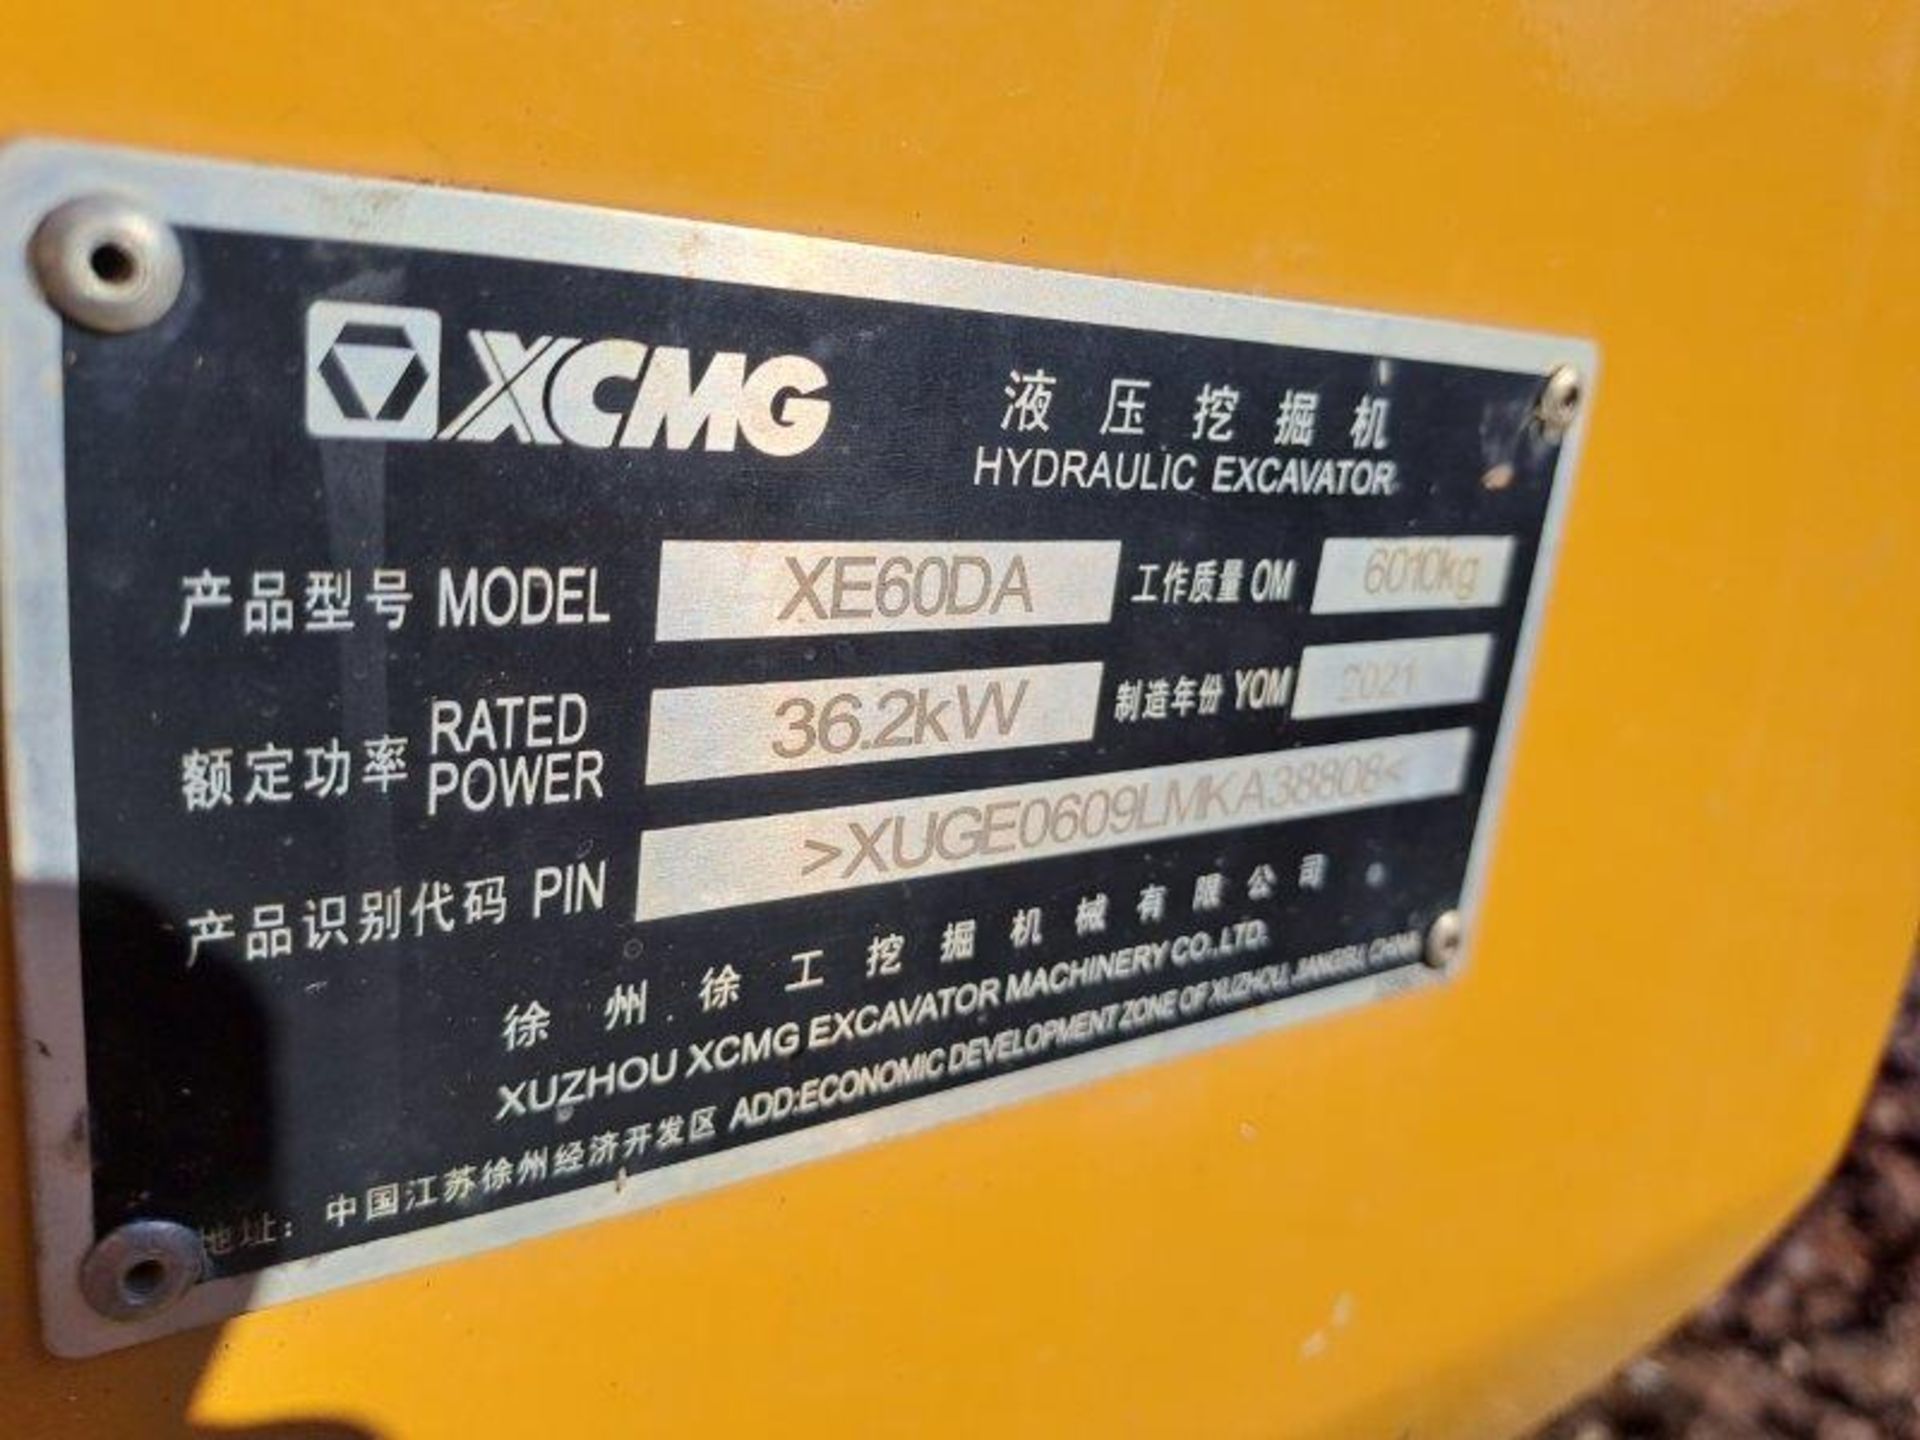 XCMG XE60DA midi excavator, serial no. SUGE0609LMKA38808, hours 850, with blade, air con, seat belt, - Image 14 of 18